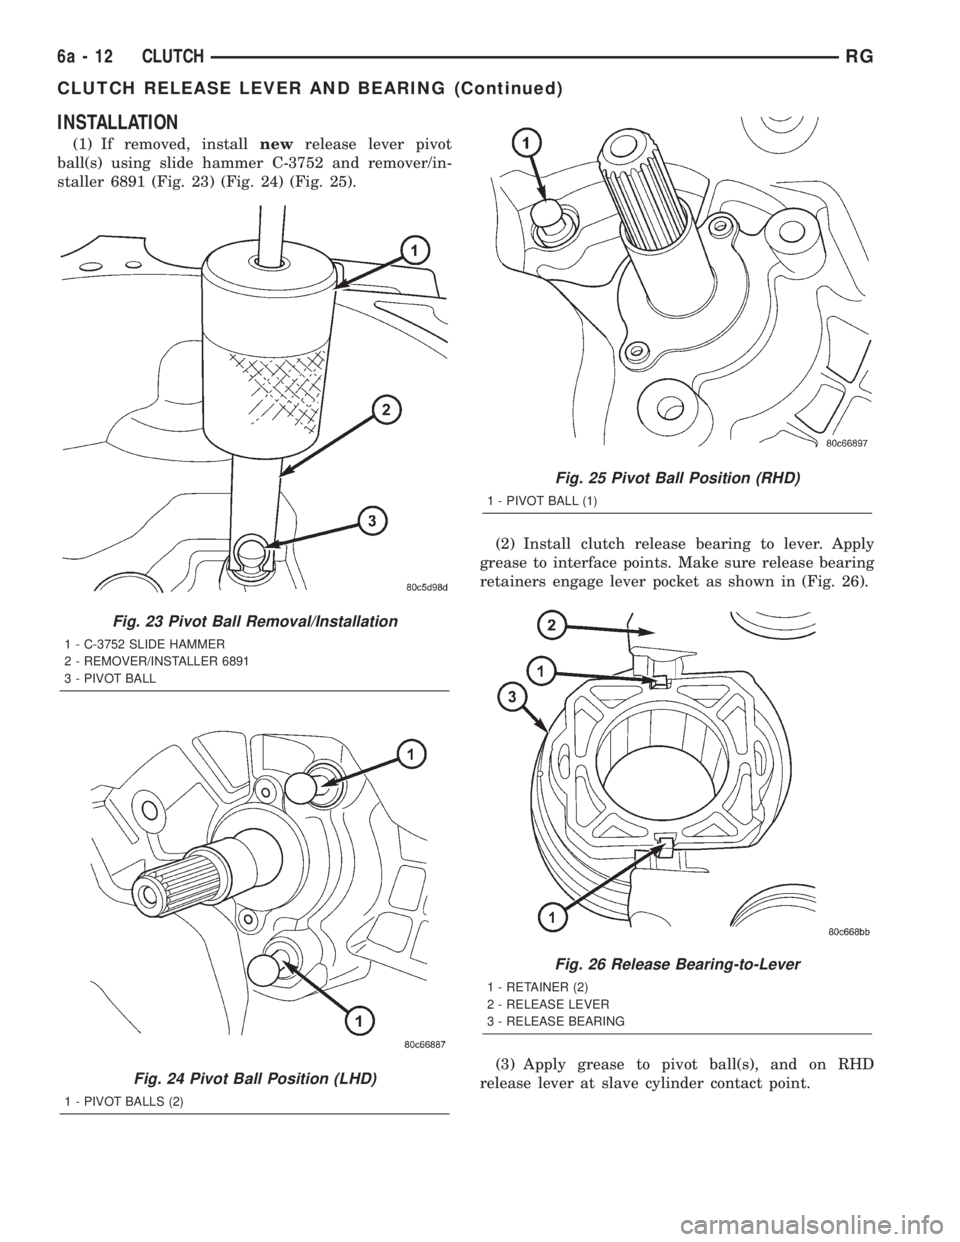 CHRYSLER VOYAGER 2001  Service Manual INSTALLATION
(1) If removed, installnewrelease lever pivot
ball(s) using slide hammer C-3752 and remover/in-
staller 6891 (Fig. 23) (Fig. 24) (Fig. 25).
(2) Install clutch release bearing to lever. Ap